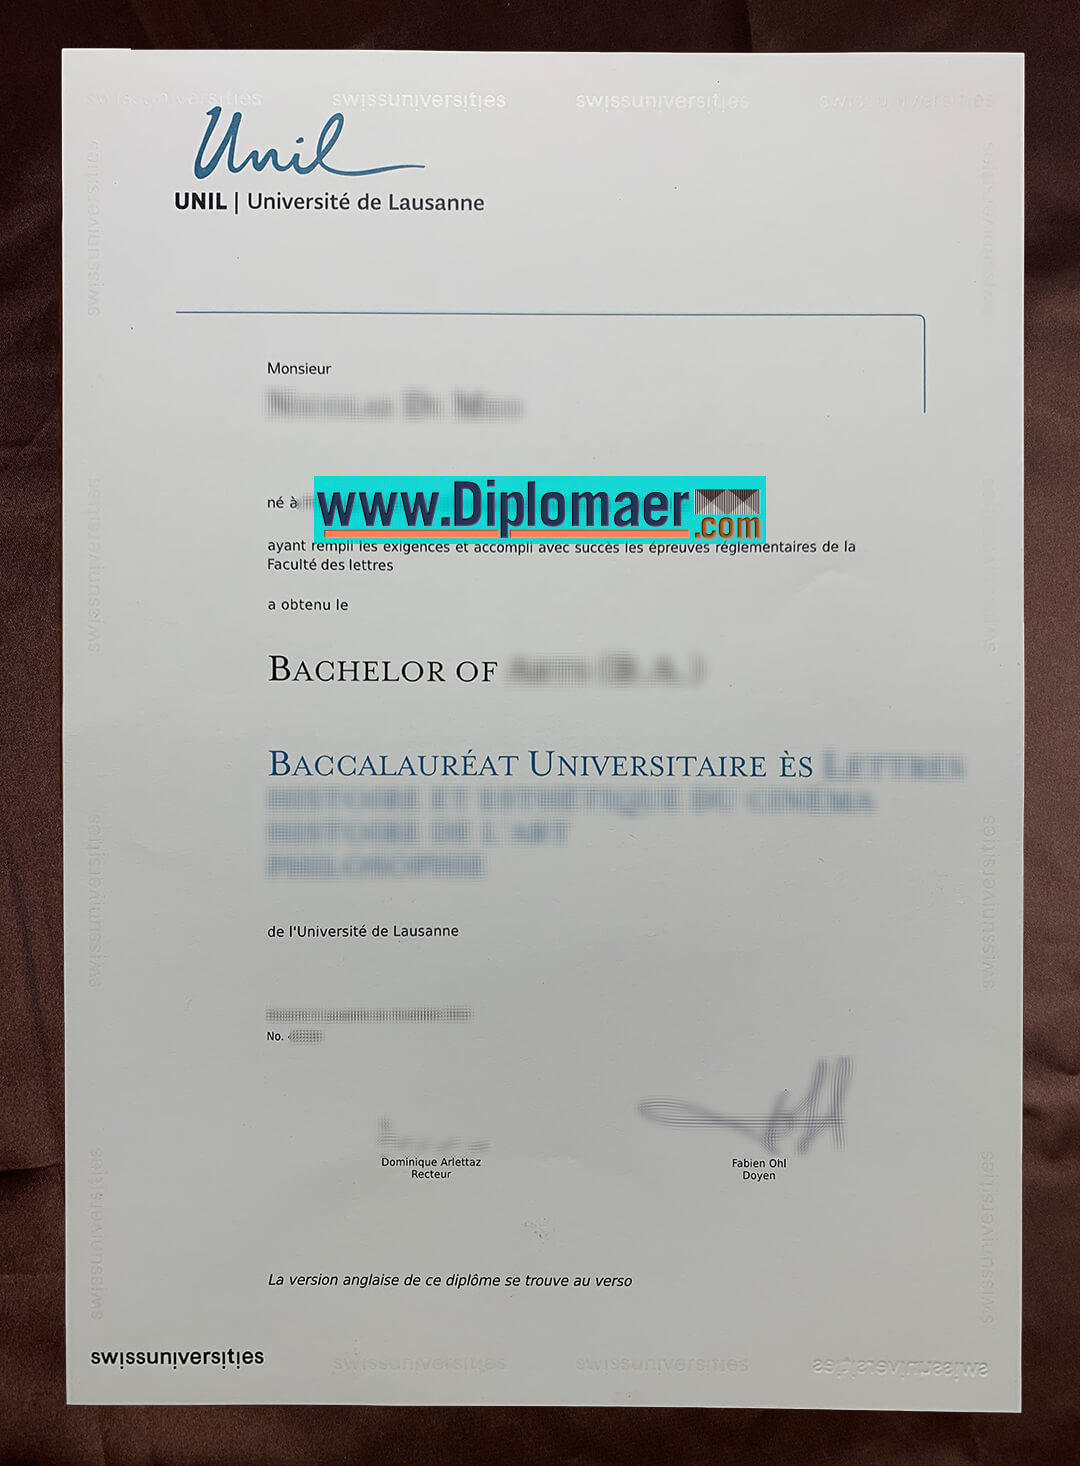 Universite de Lausanne fake diploma - What are the benefits of having a diploma from the Université of Lausanne?